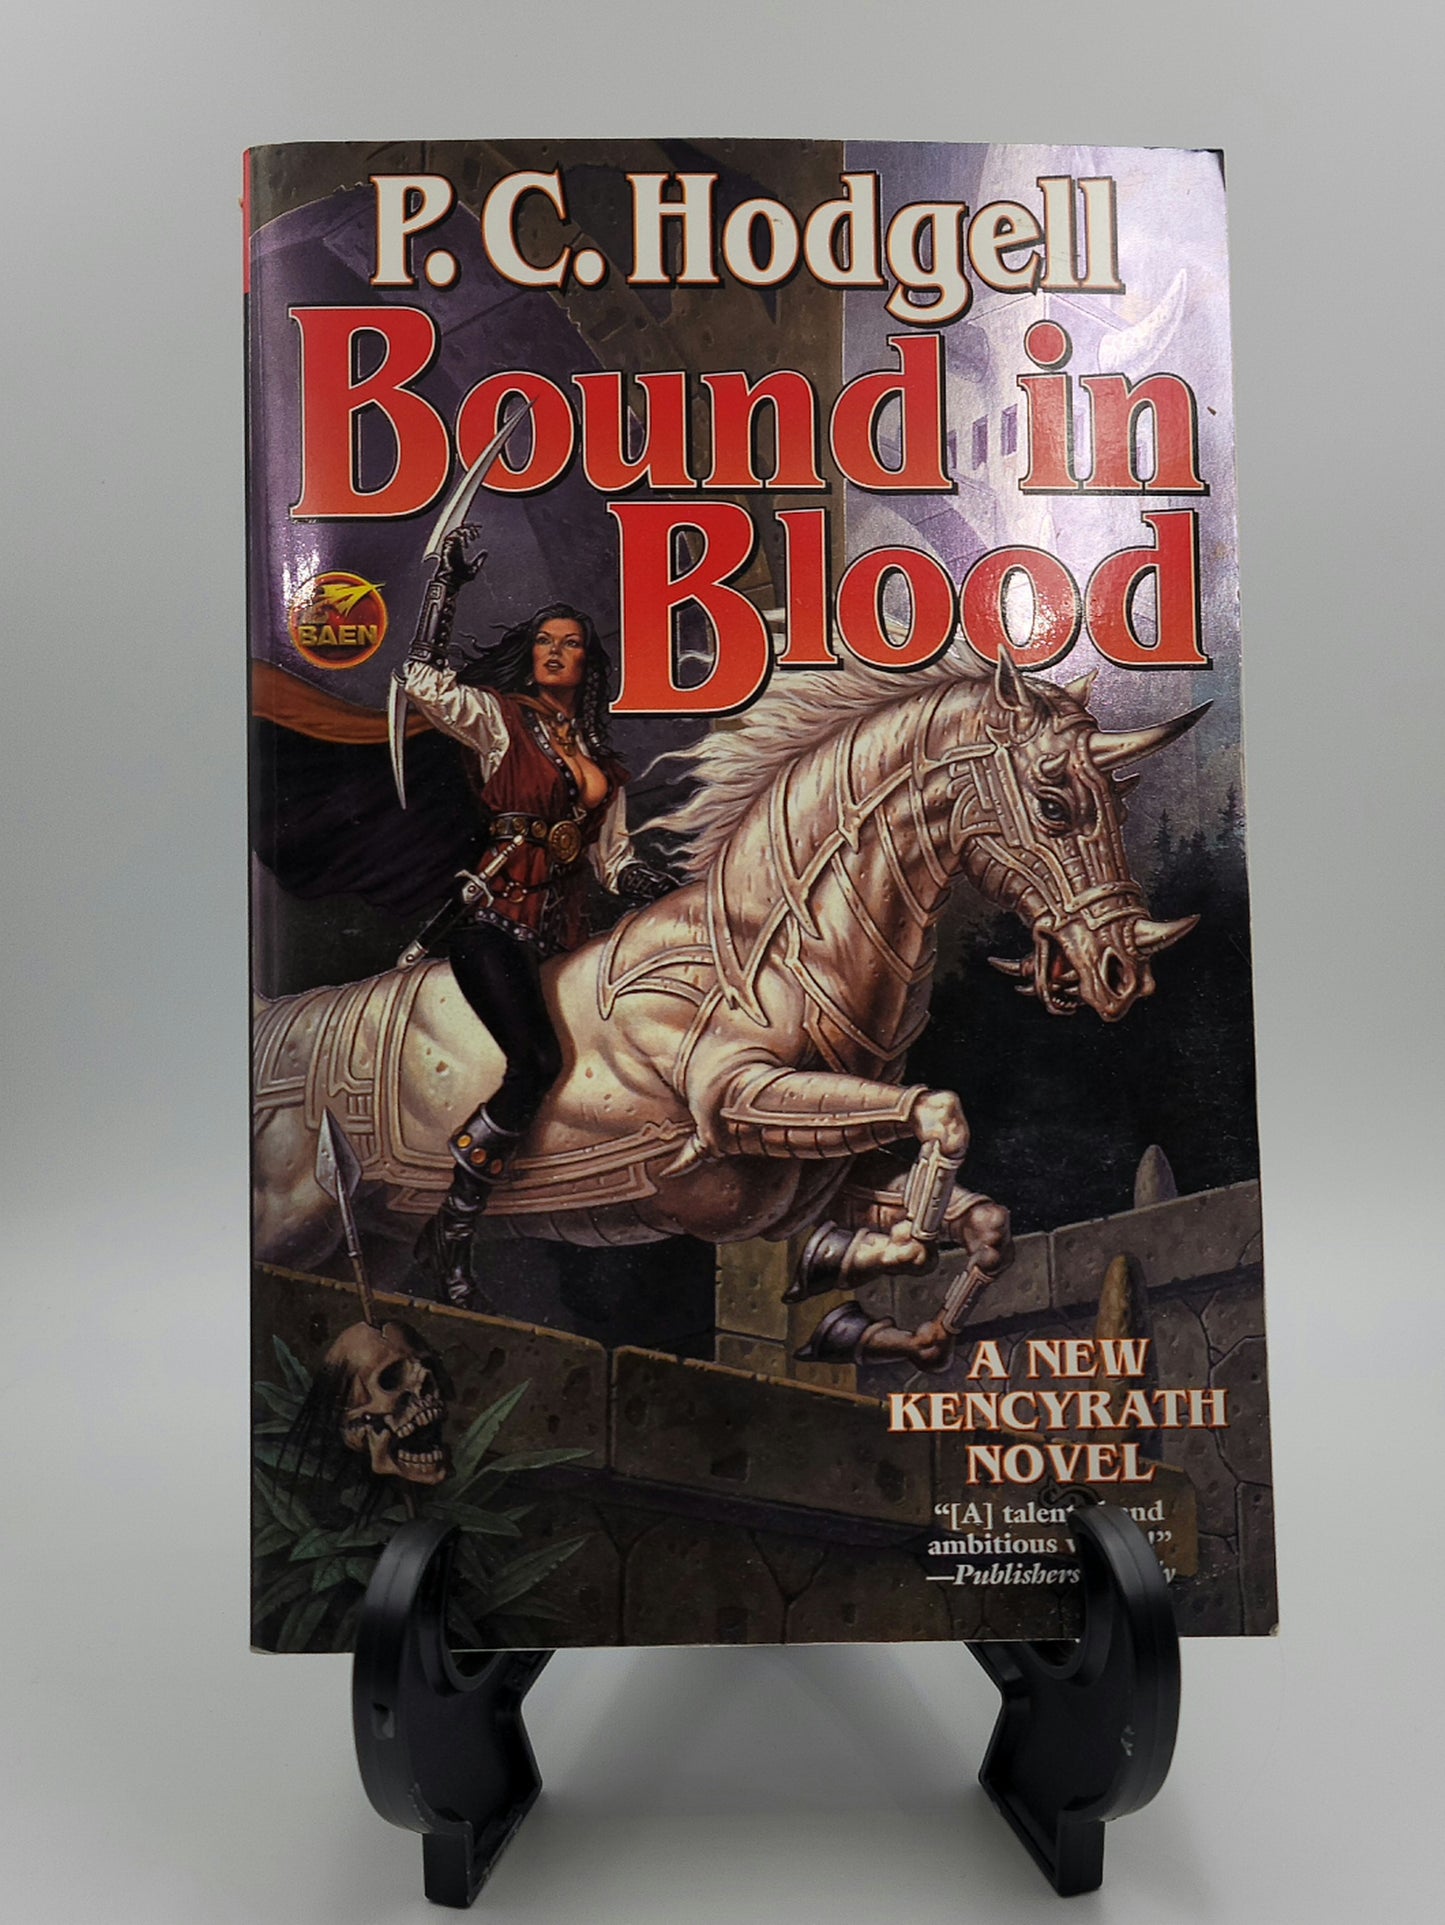 Bound in Blood By: P.C. Hodgell (Kencyrath Series #5)